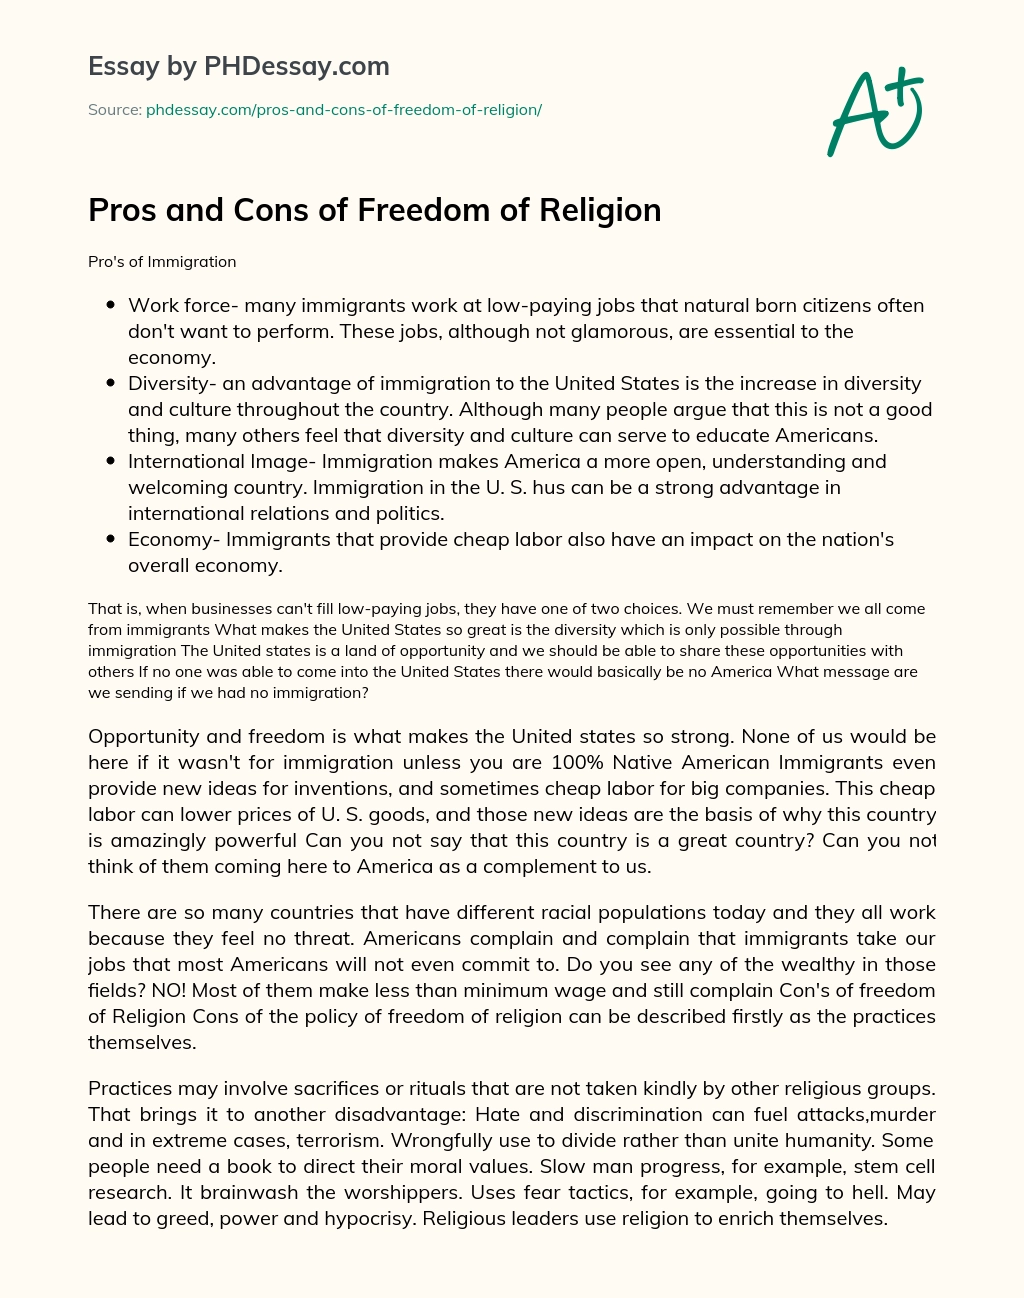 Pros and Cons of Freedom of Religion essay